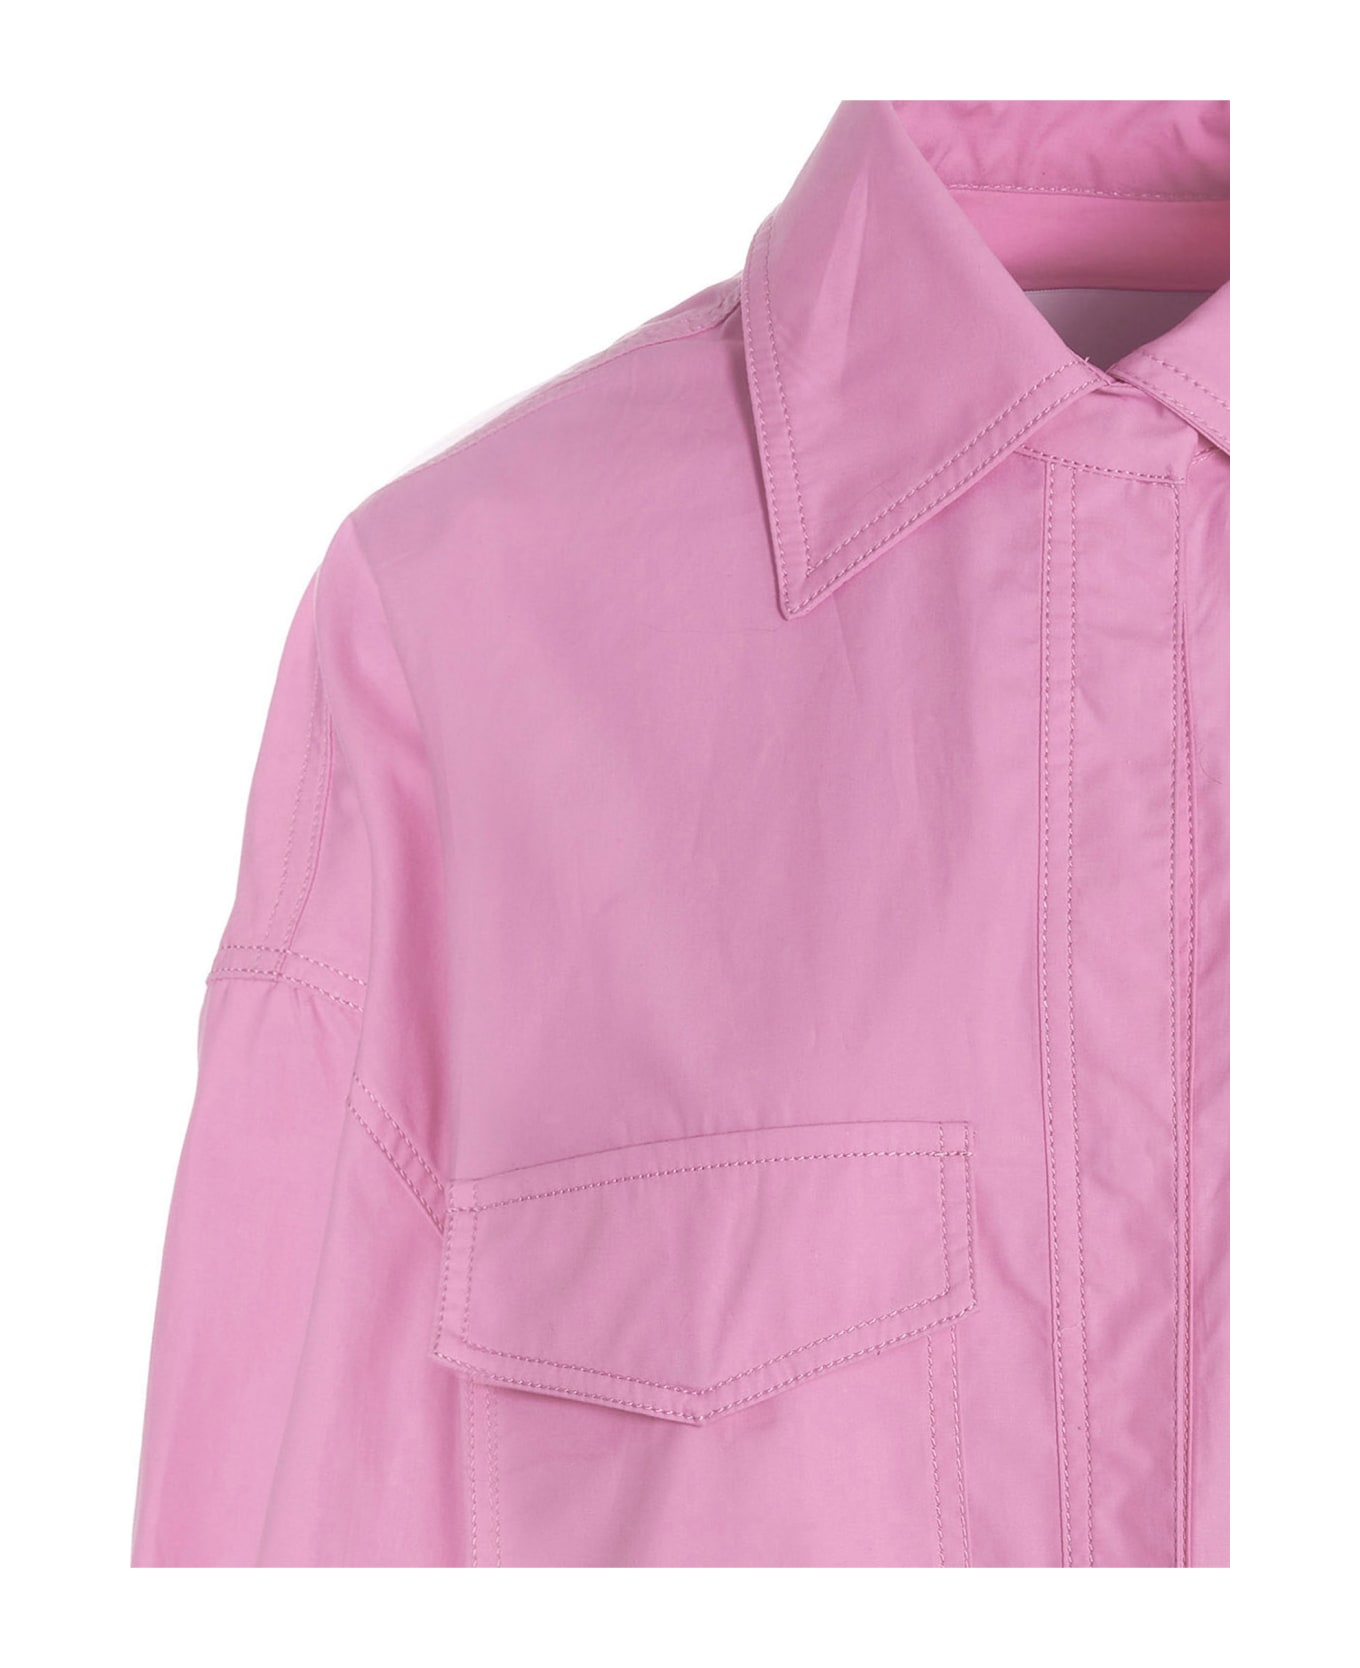 The Attico Logo Embroidery Overshirt - NEON PINK シャツ